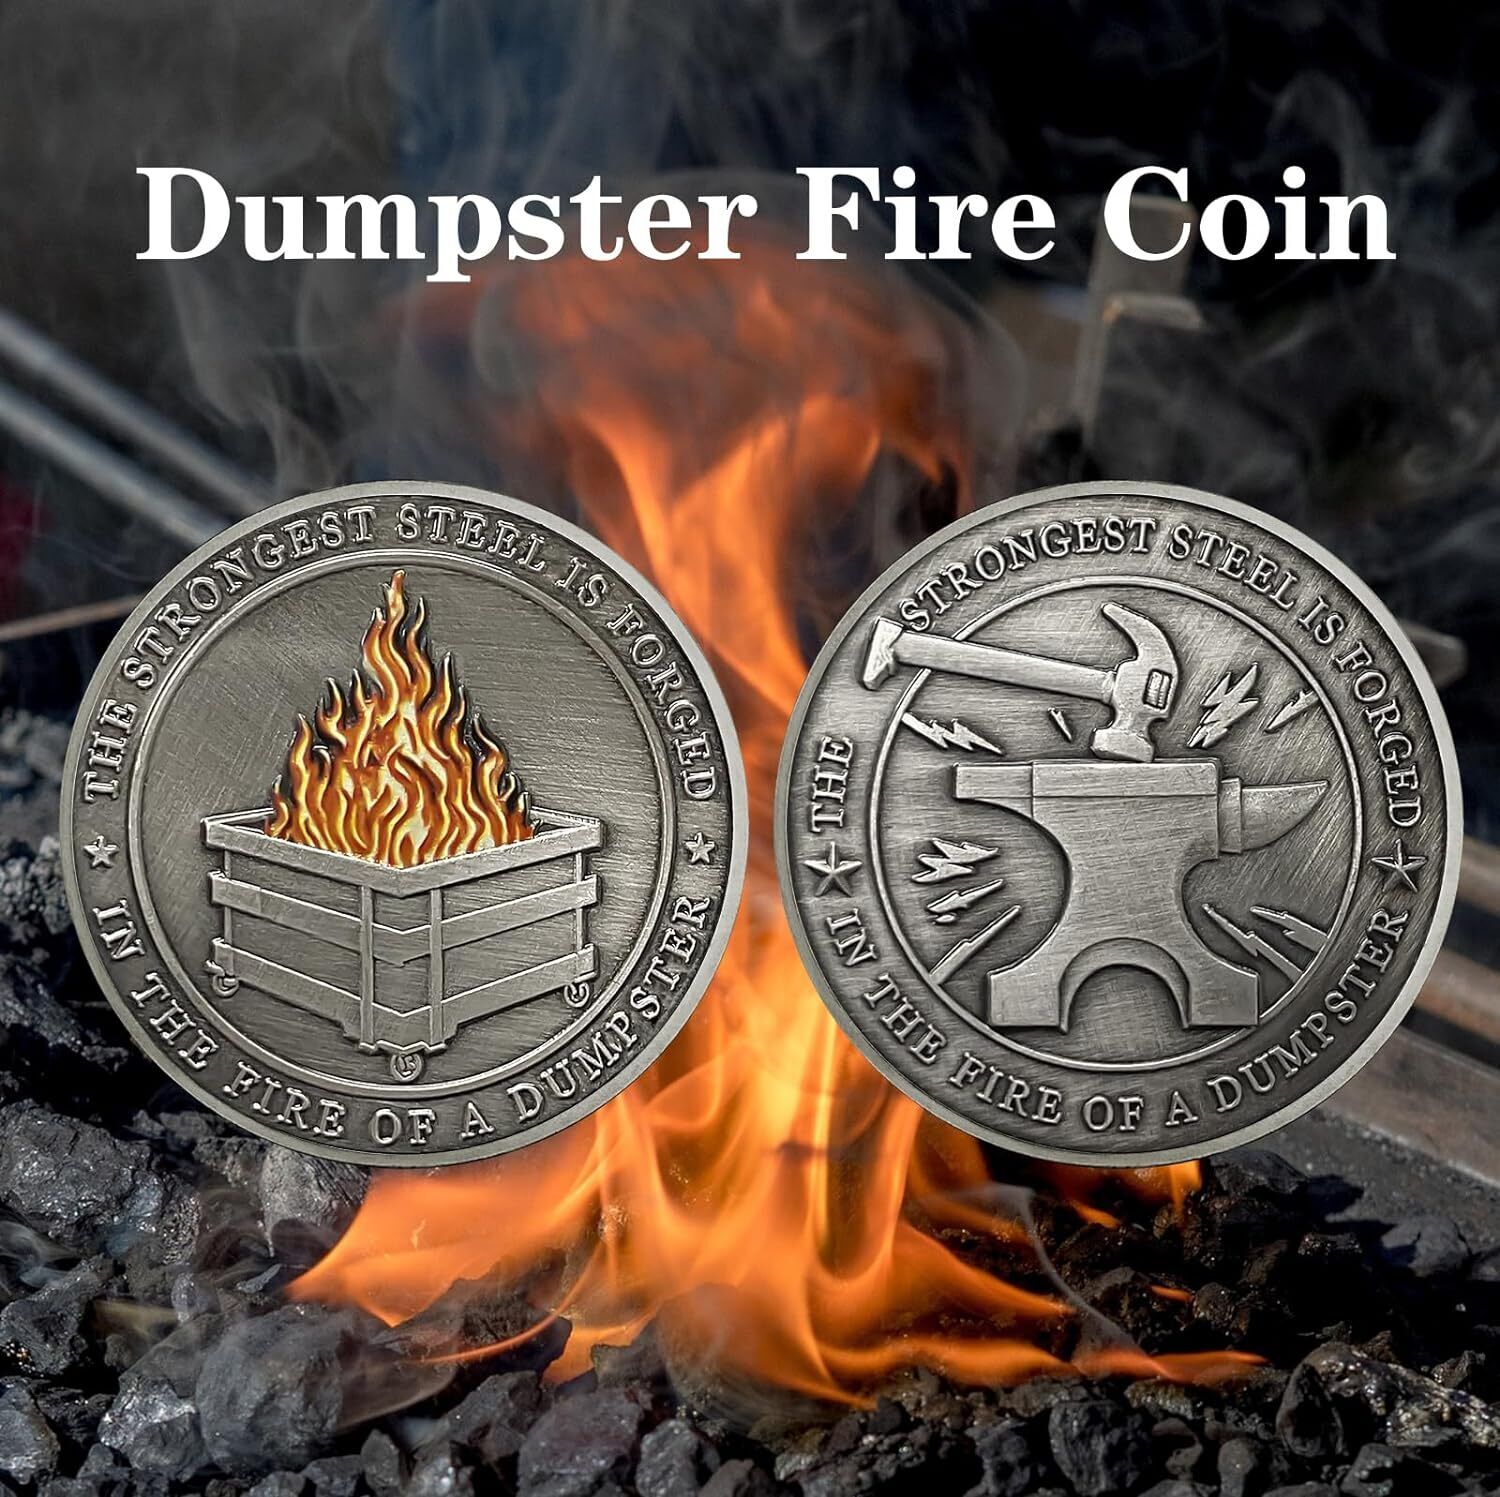 Dumpster Fire Coin Hilarious Medallion for Staff Appreciation Office Gifts